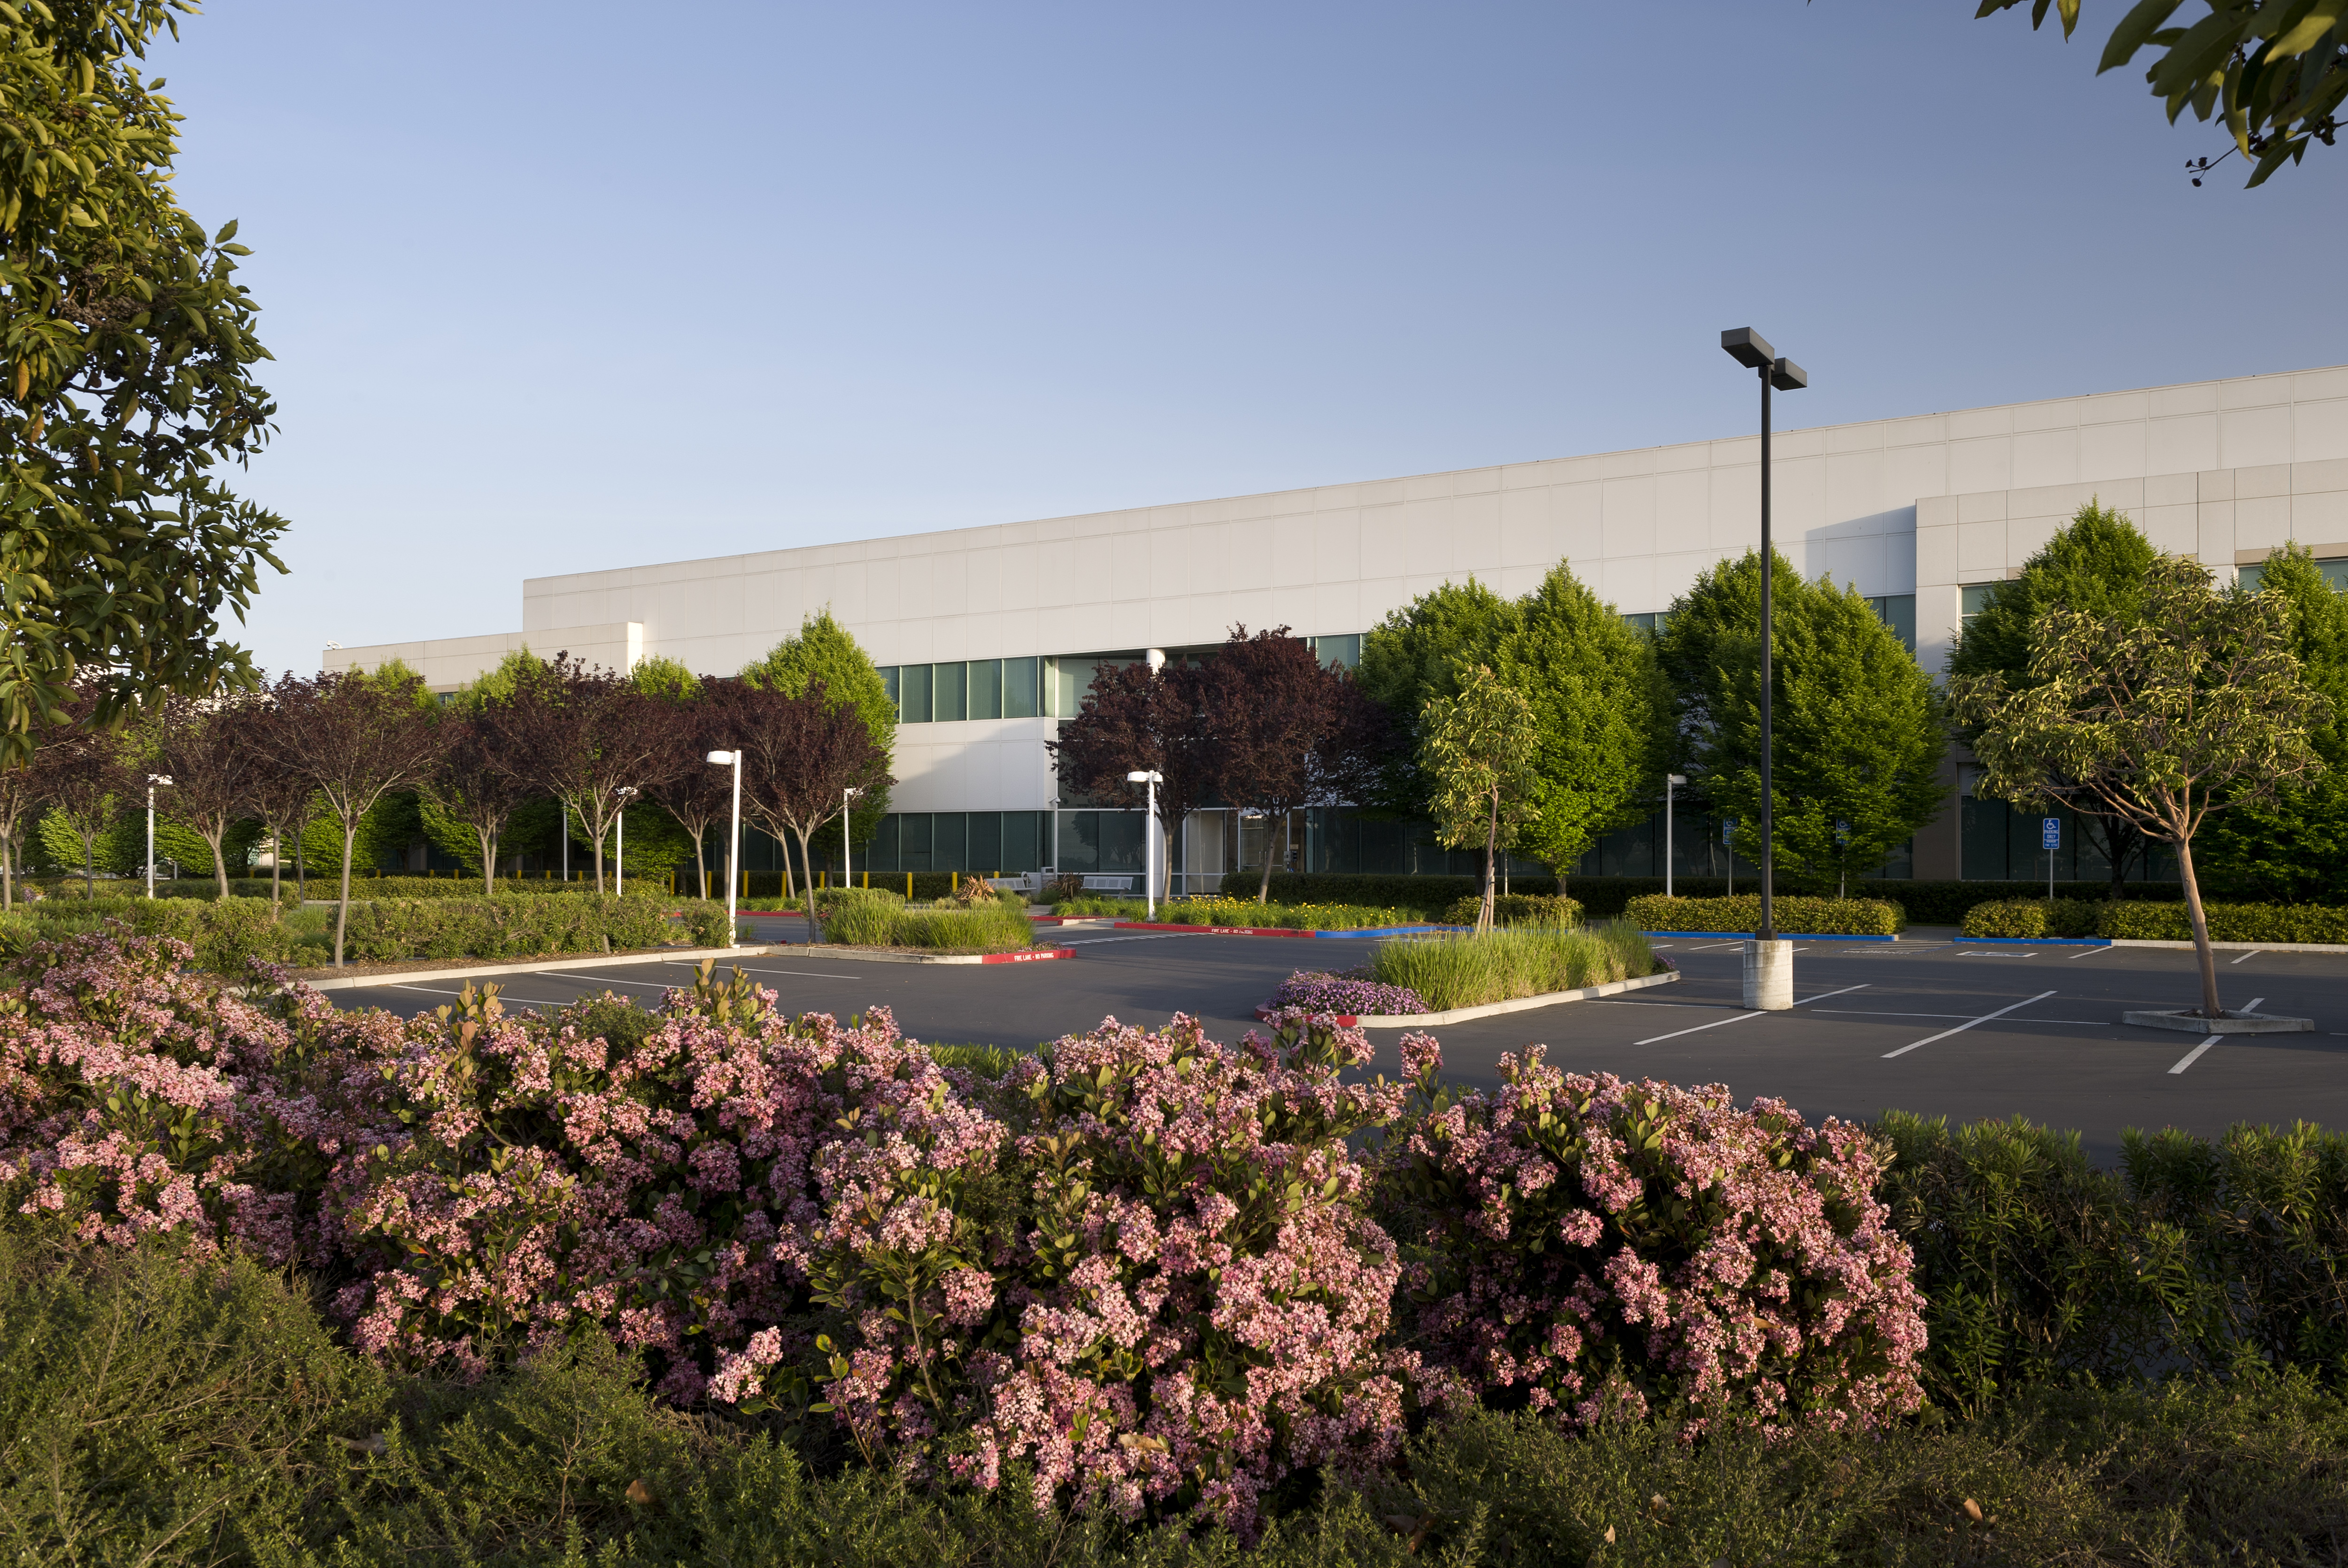 Carter Validus Mission Critical REIT II Buys Data Center and Healthcare Properties for $64.5 Million